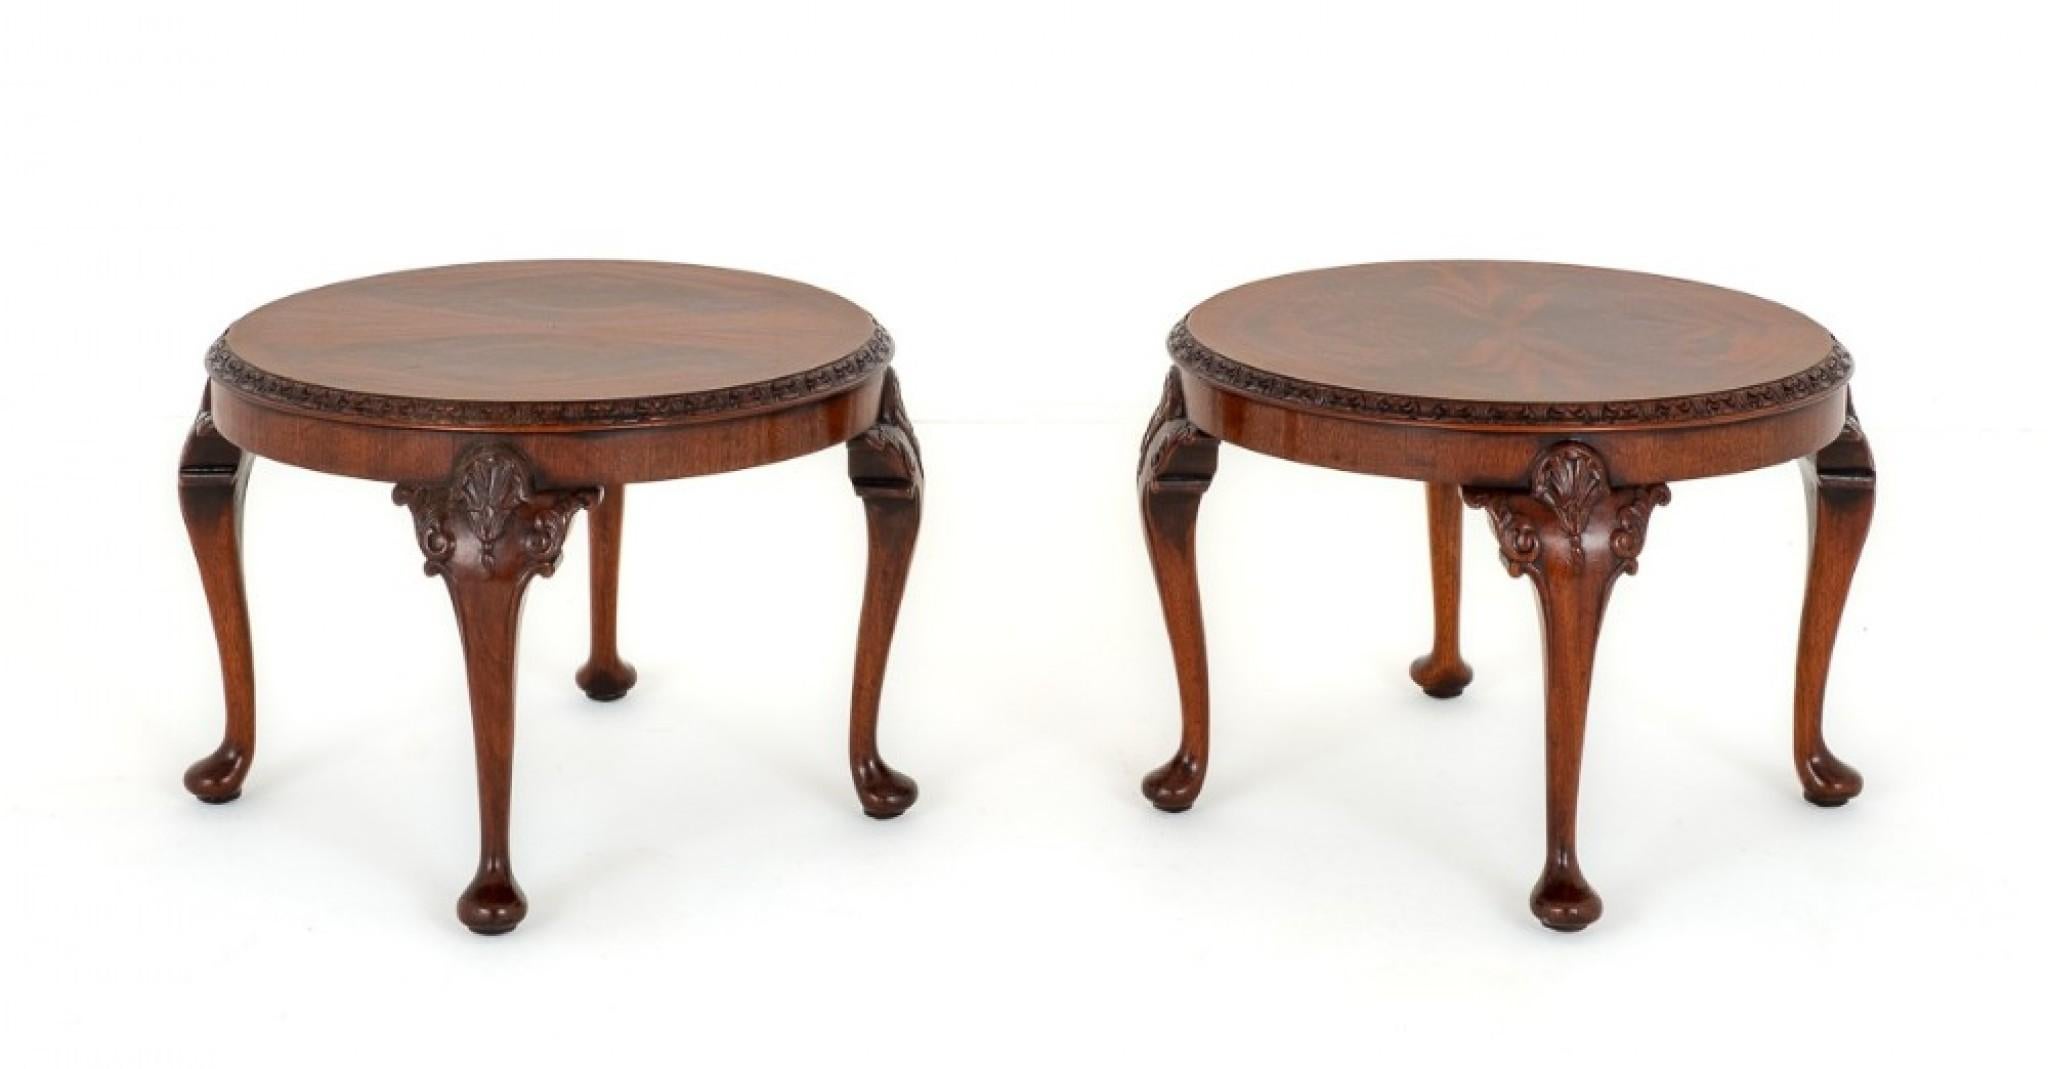 Here we Have a Nice Quality Pair of Matching Chippendale Style Mahogany Coffee Tables.
Circa 1930
Each Table Stands Upon Cabriole Legs With Pad Feet Featuring Carved Shells and Scrolls to the Knees.
The Tops of the Tables Having Book Matched Swirl